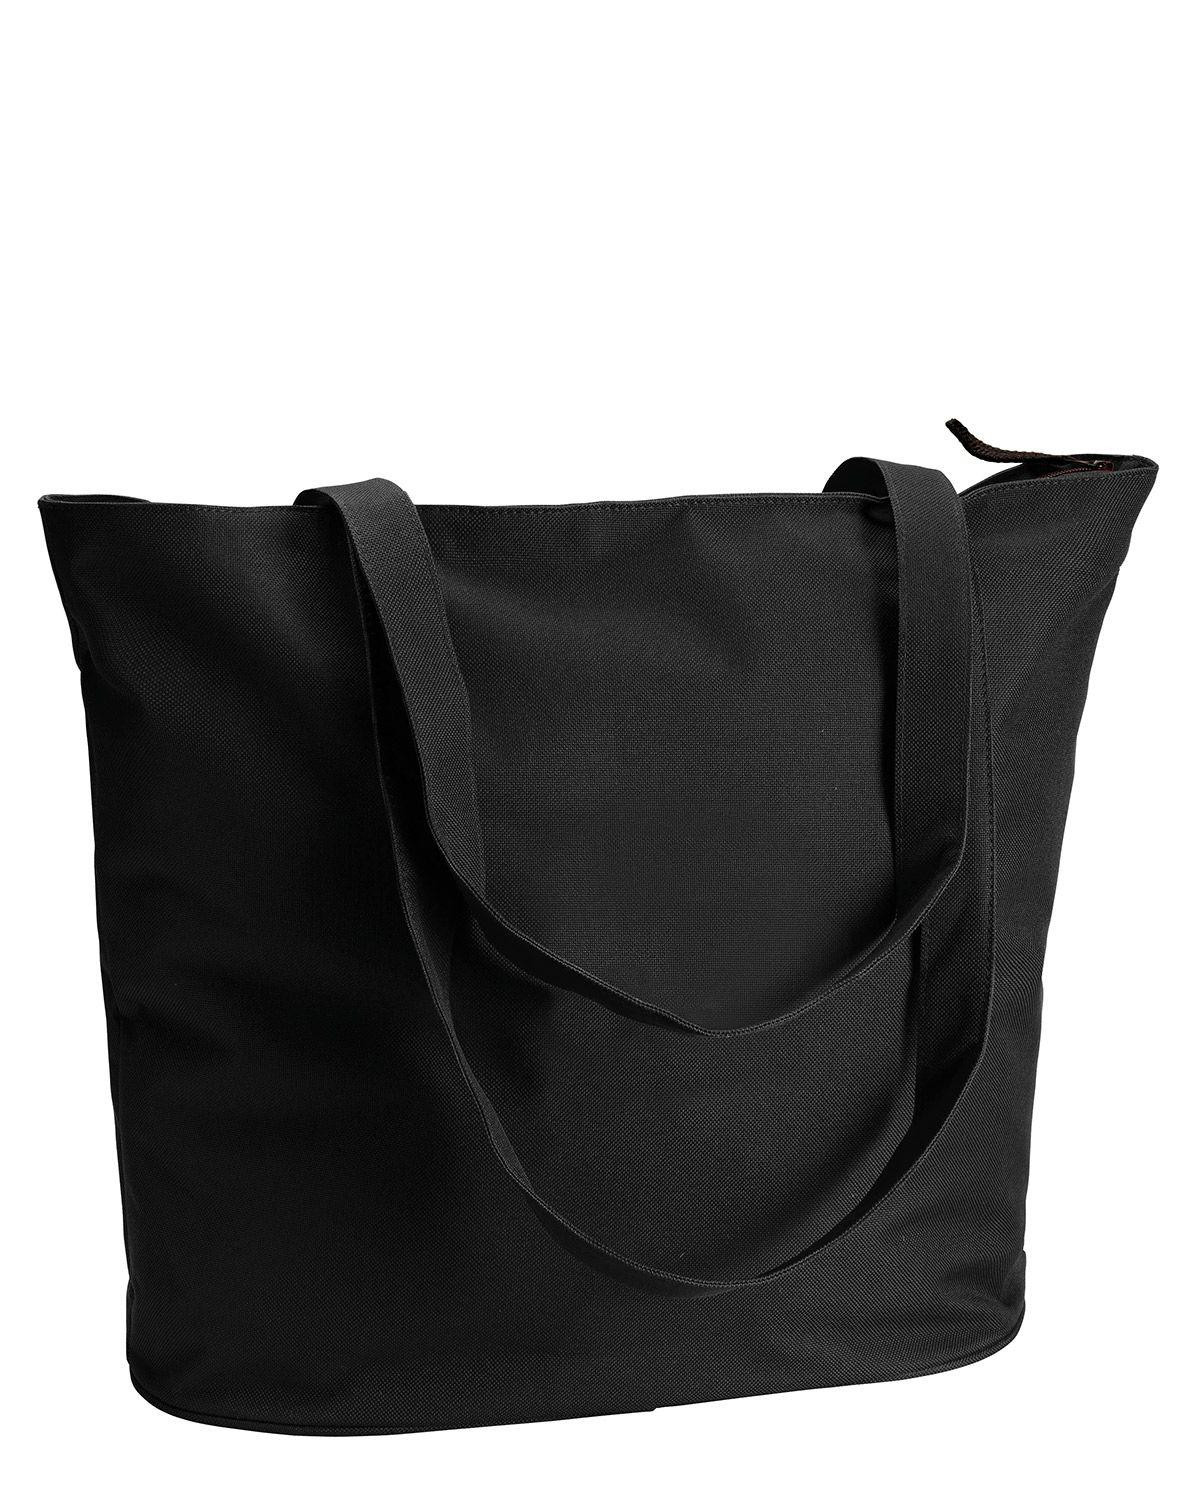 ID Shopping Bag (Sort, One Size)